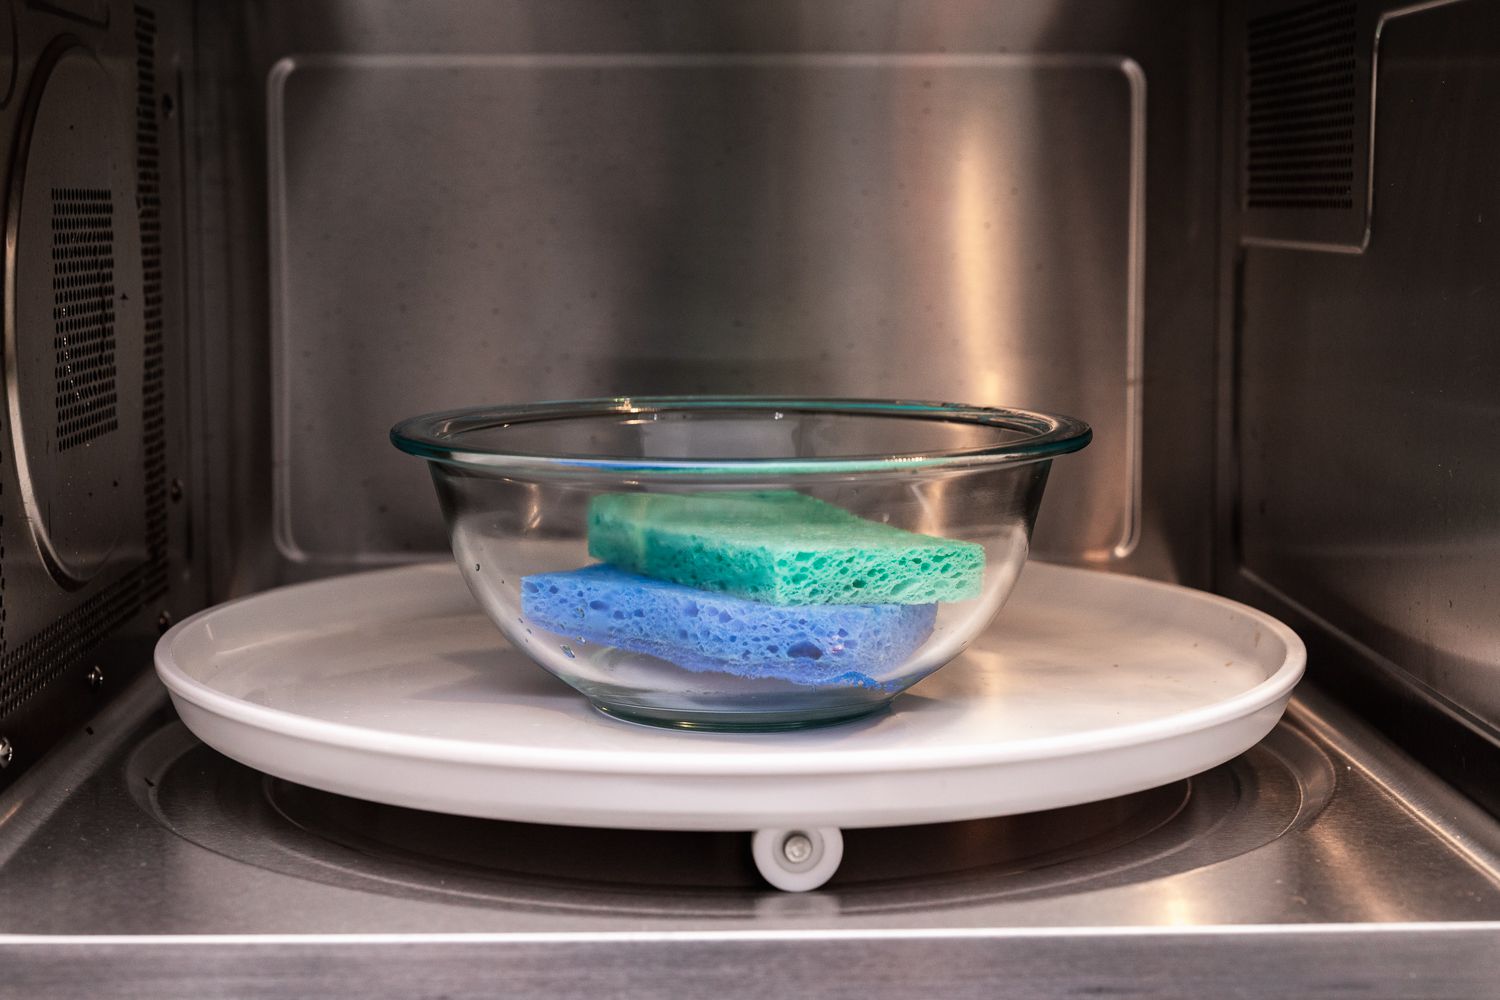 Soaking sponges in a microwave safe bowl